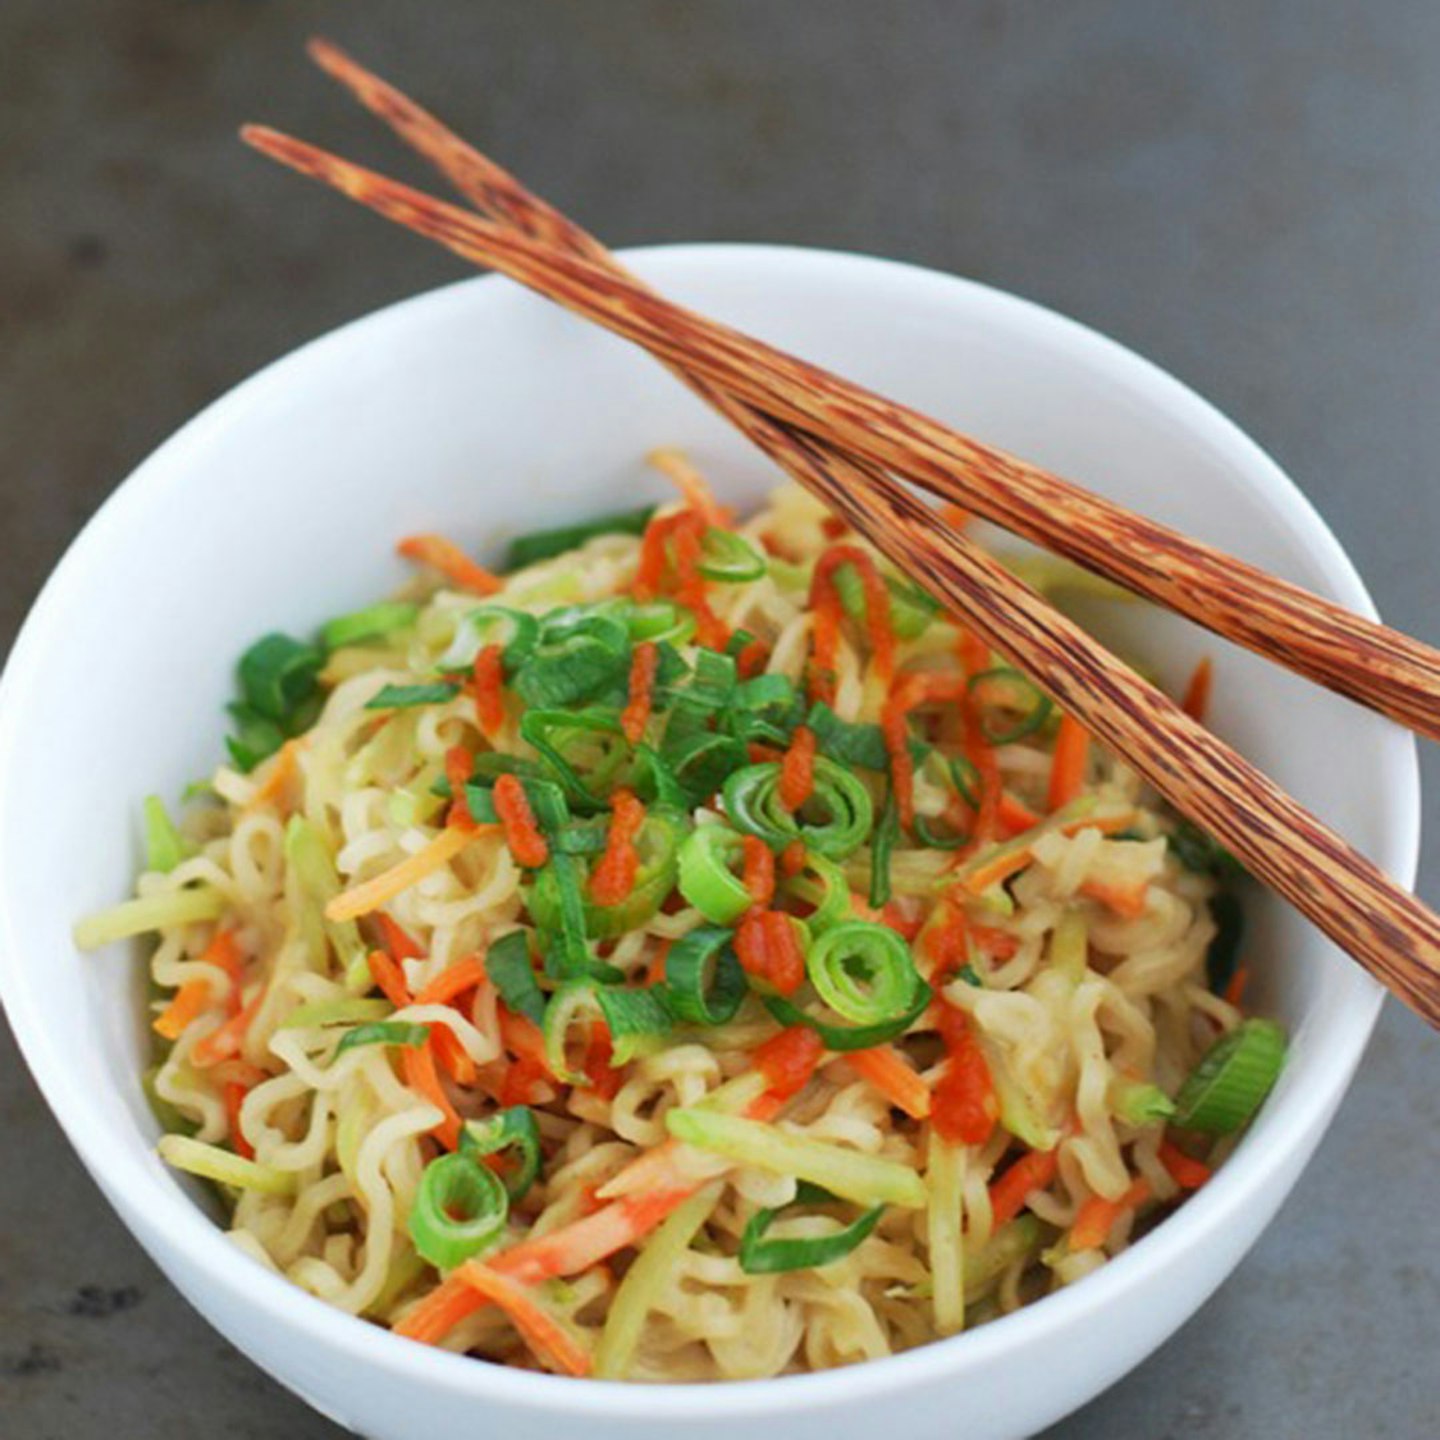 Peanut Butter And Broccoli Noodles